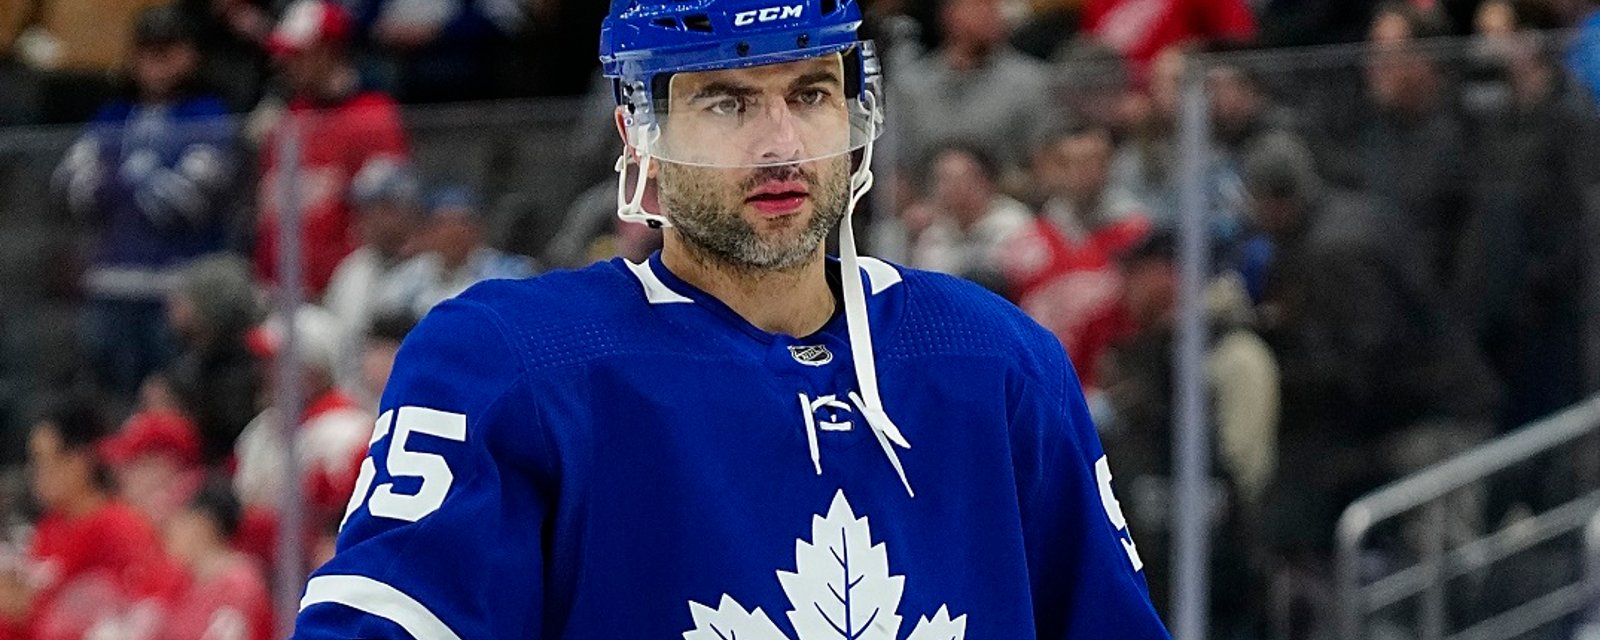 Leafs D Mark Giordano on the verge of NHL history! 